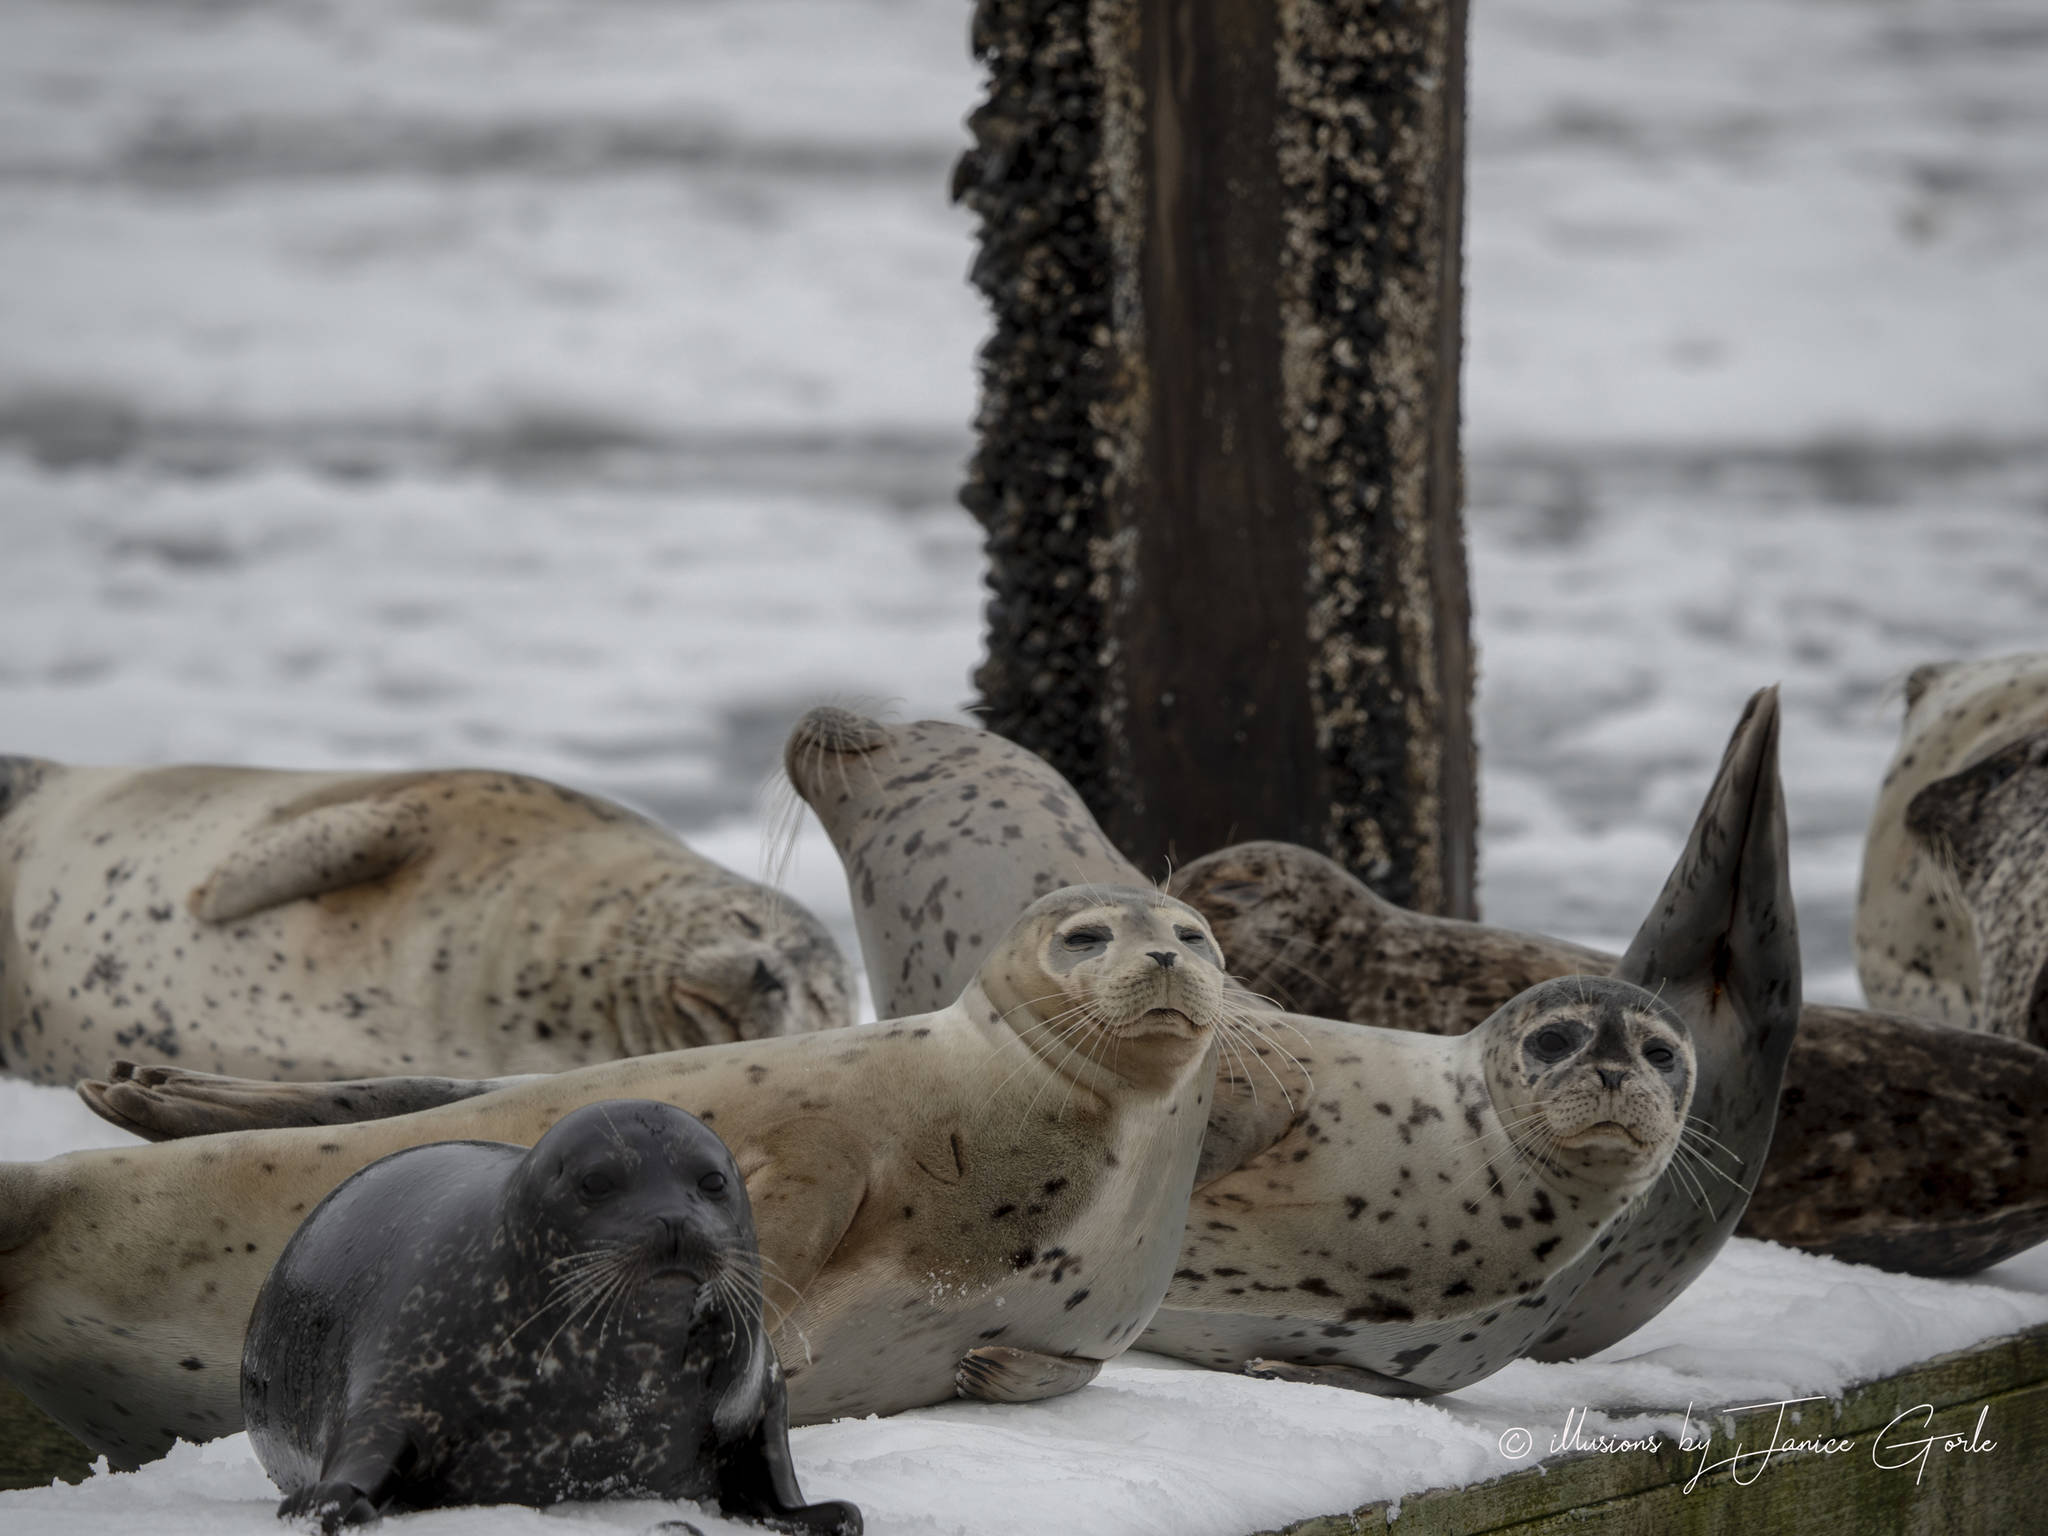 Harbor seals relax on a dock on Feb. 13, 2019. (Courtesy Photo | Janice Gorle)